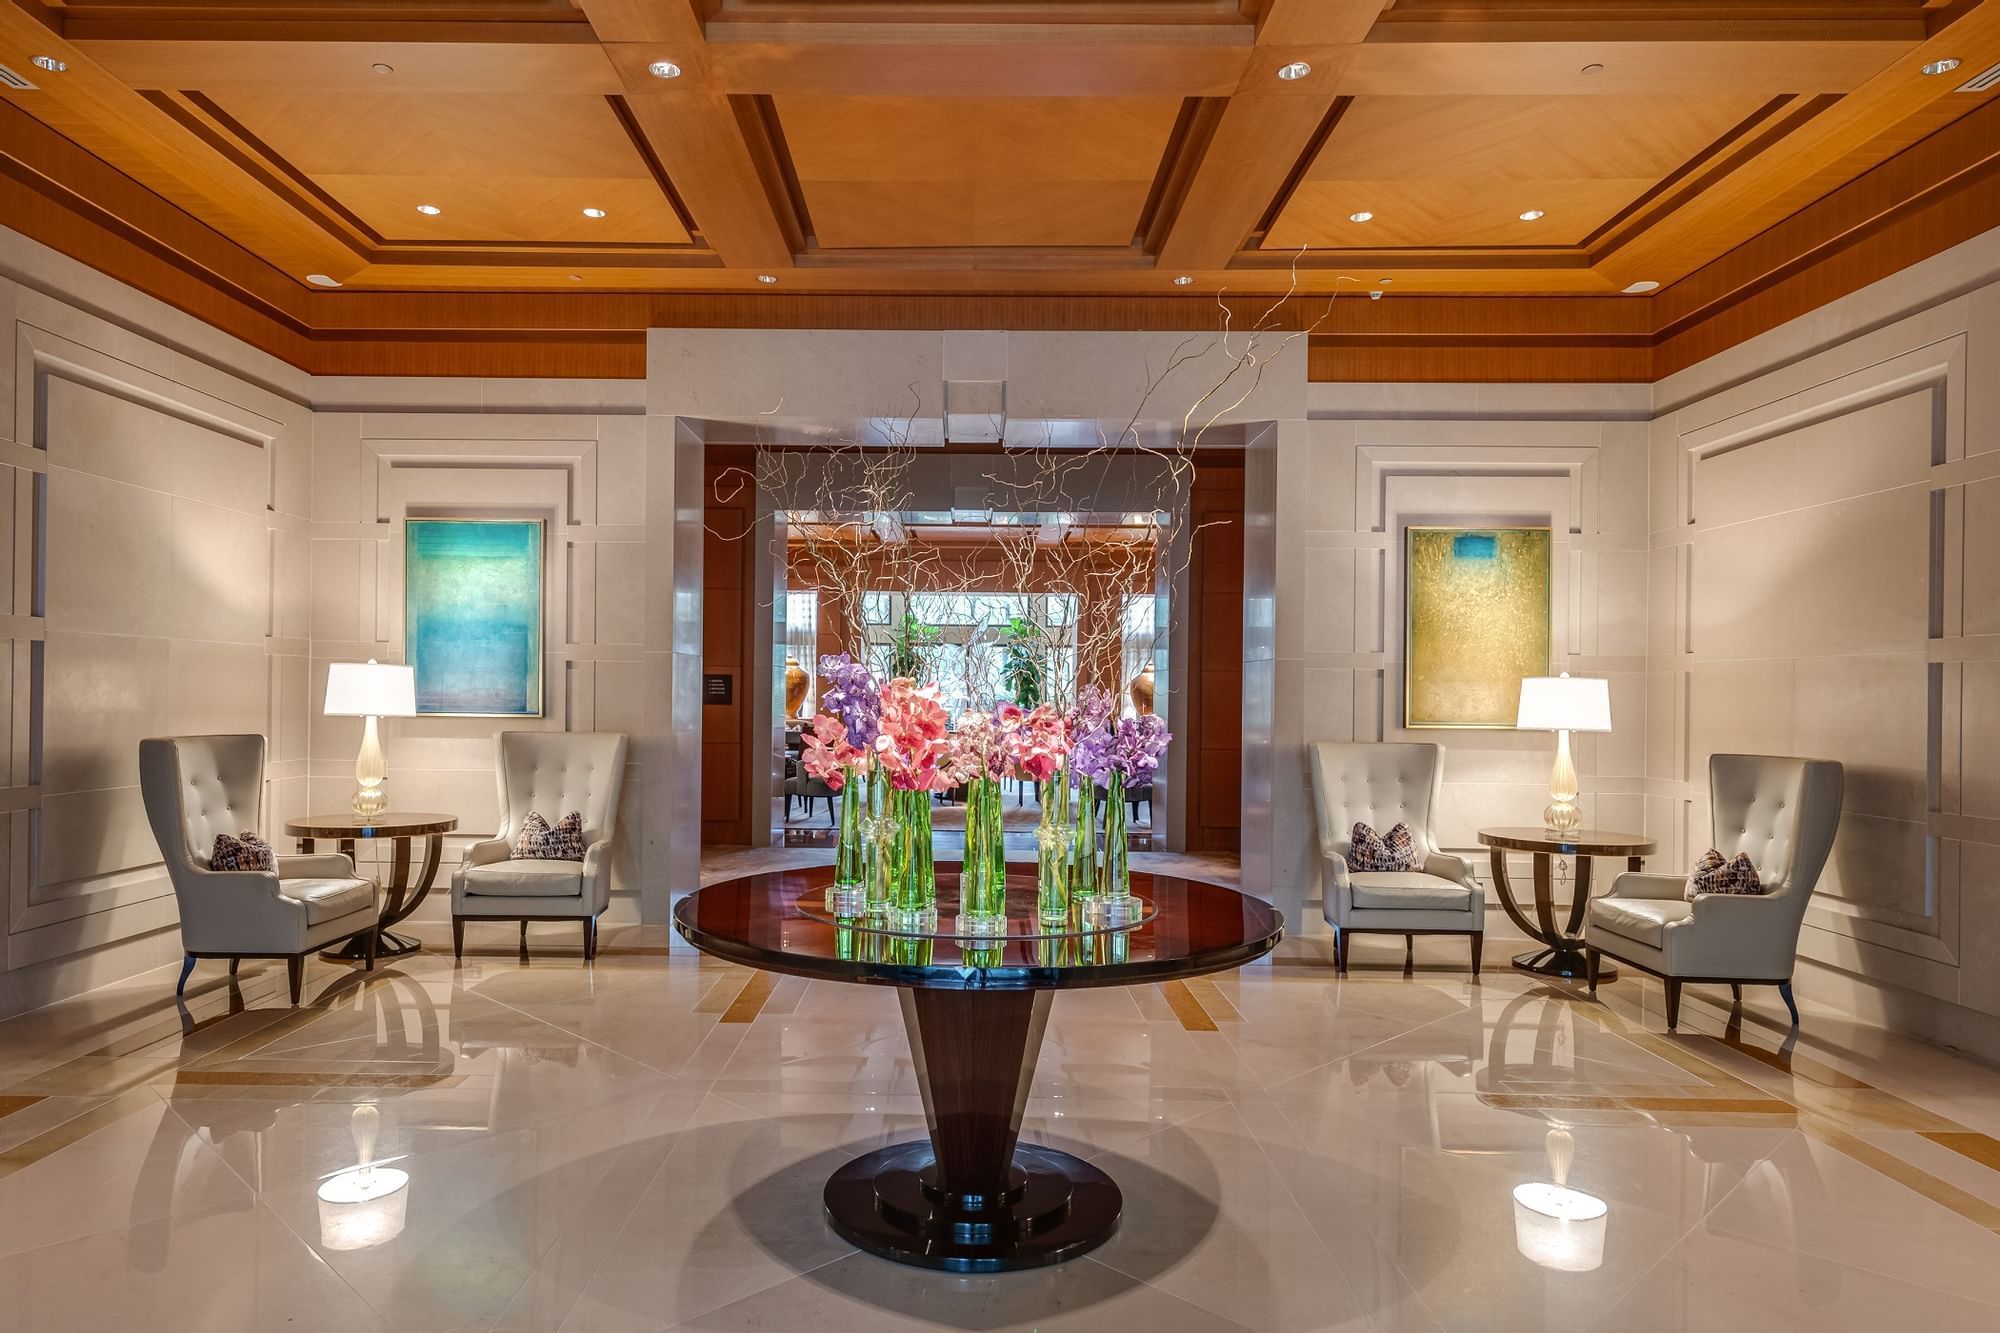 Hotel lobby with modern interior and decor at Umstead Hotel and Spa